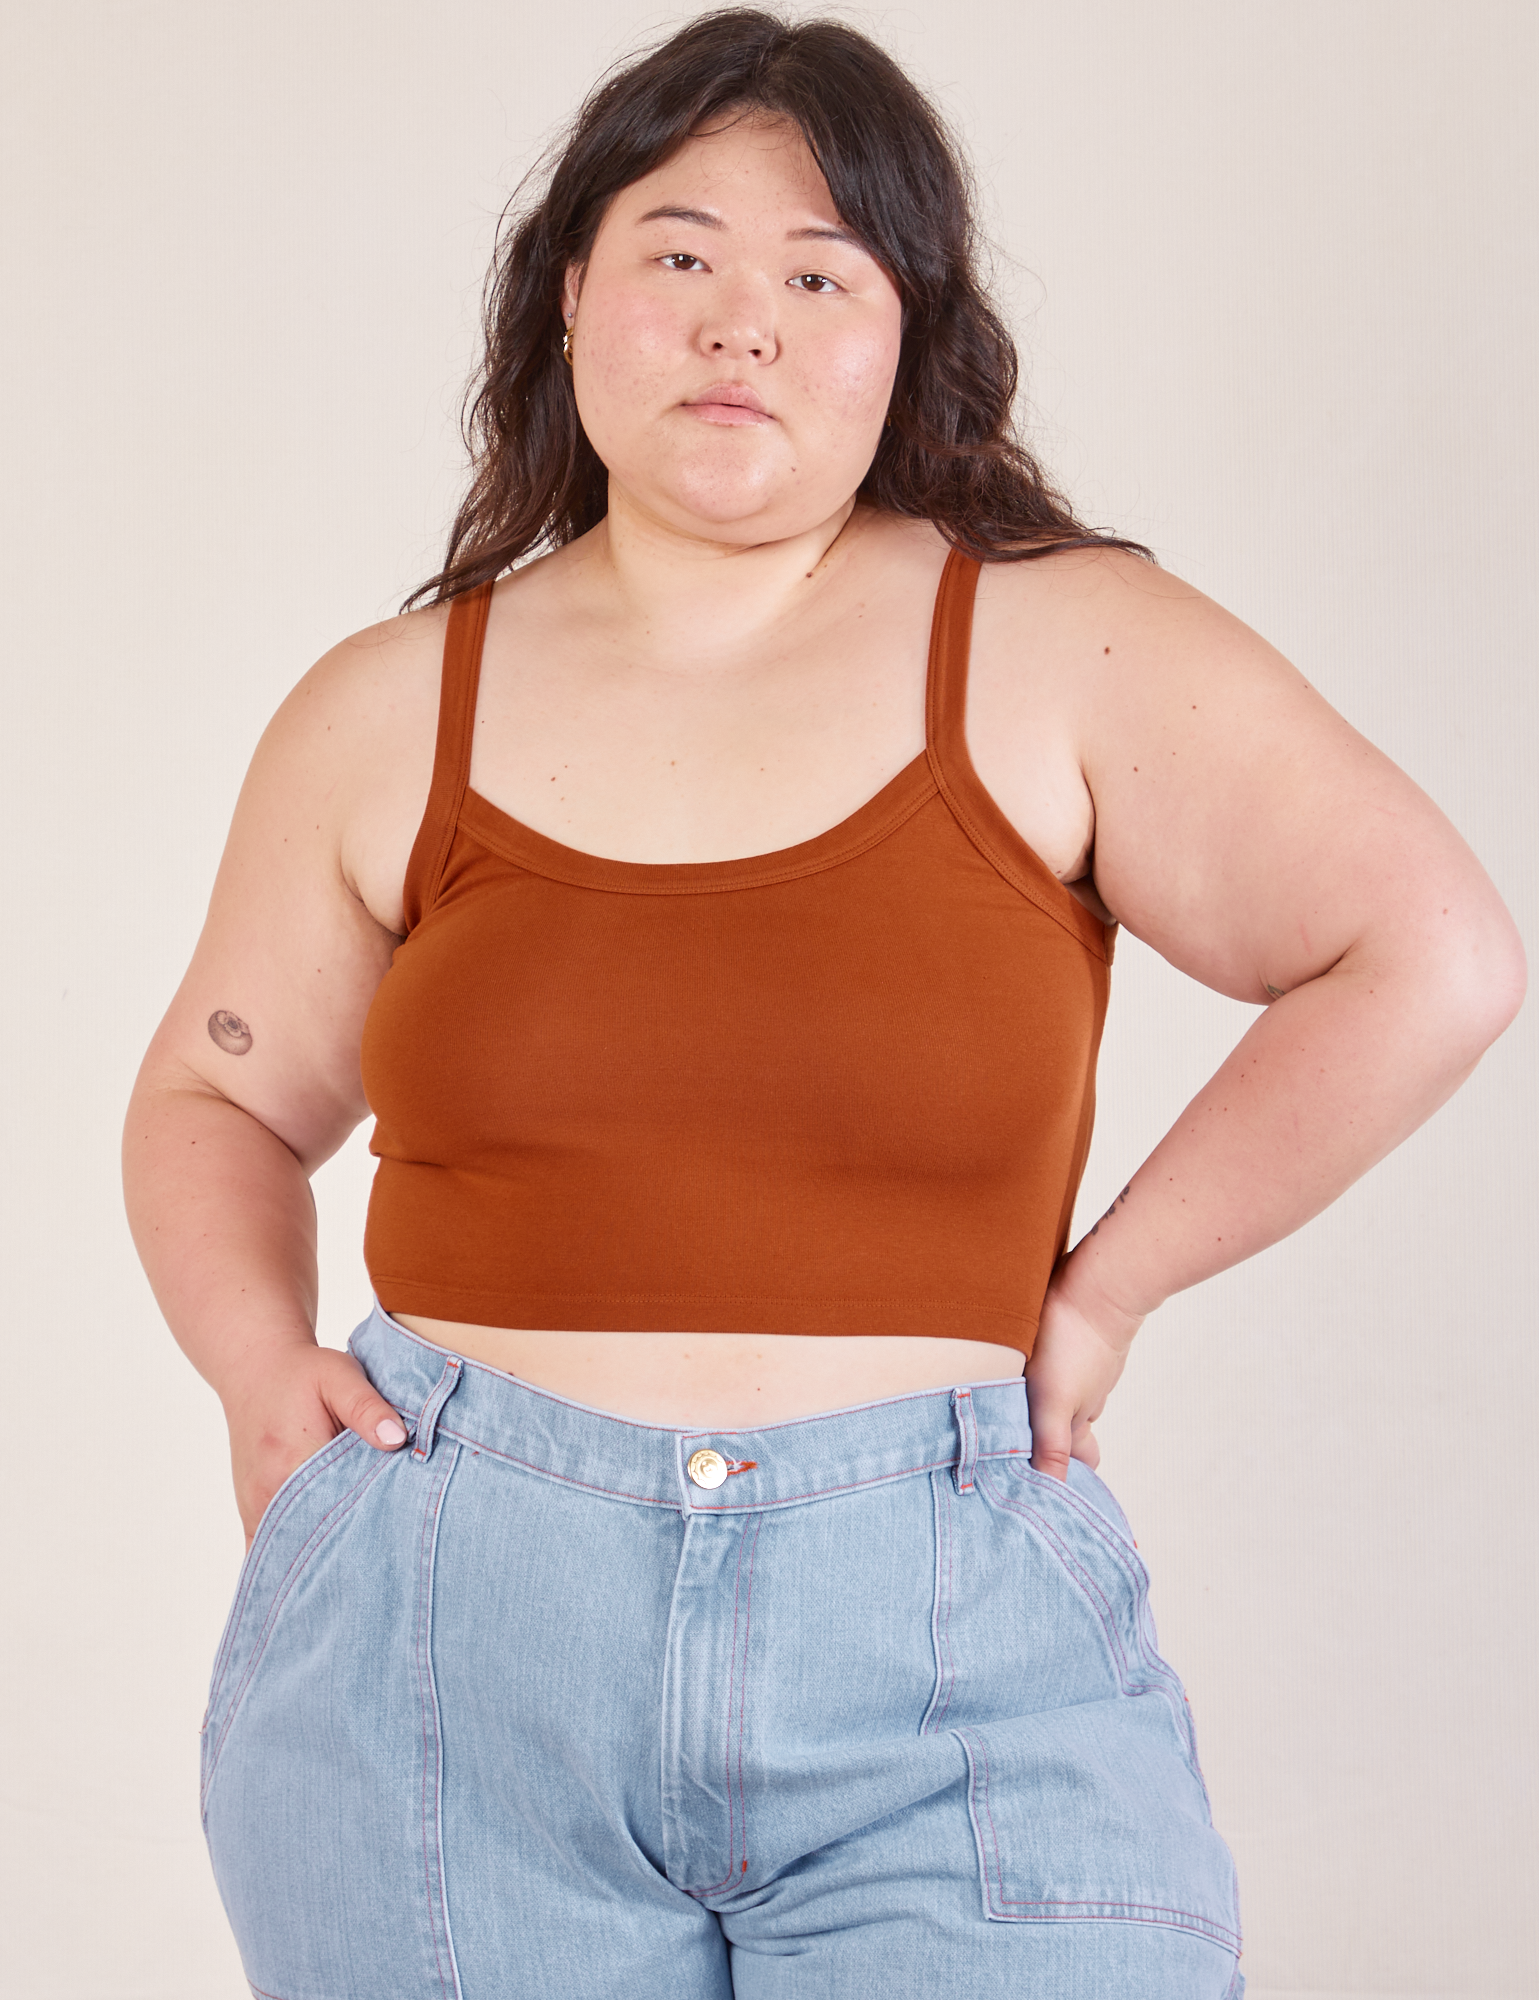 Ashley is 5’7” and wearing L Cropped Cami in Burnt Terracotta paired with light wash Carpenter Jeans